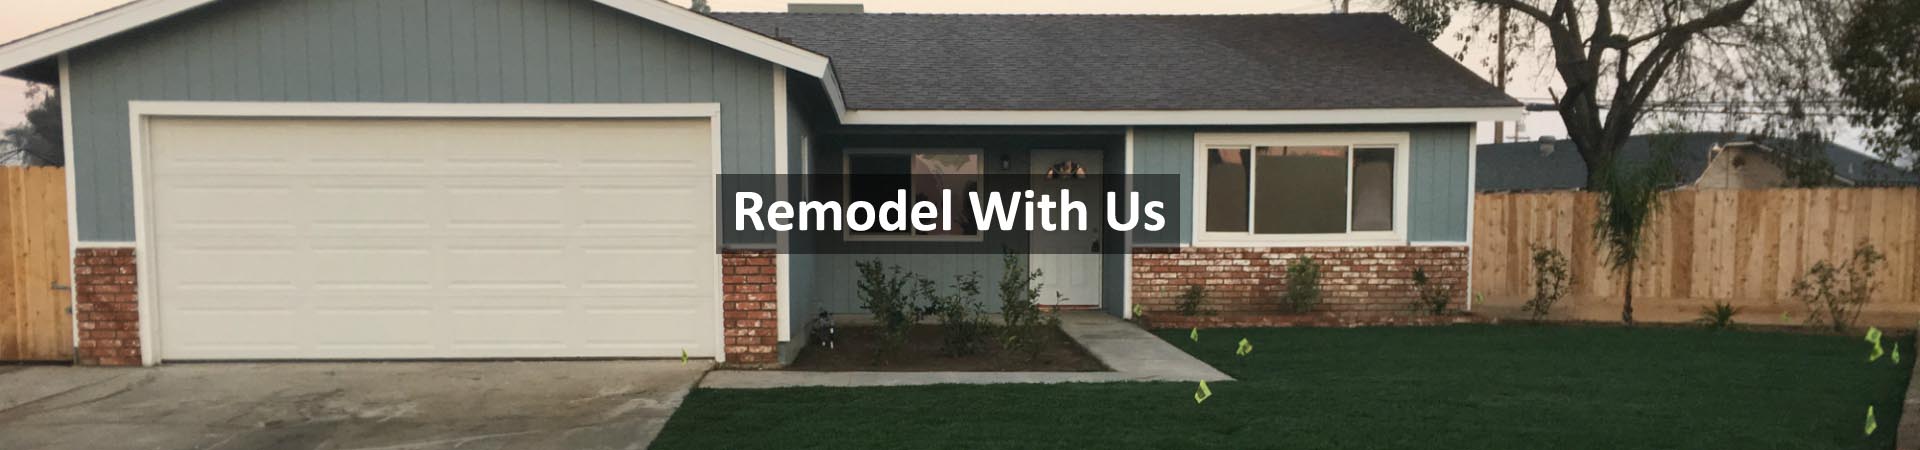 Remodeling - All Valley Housing Services